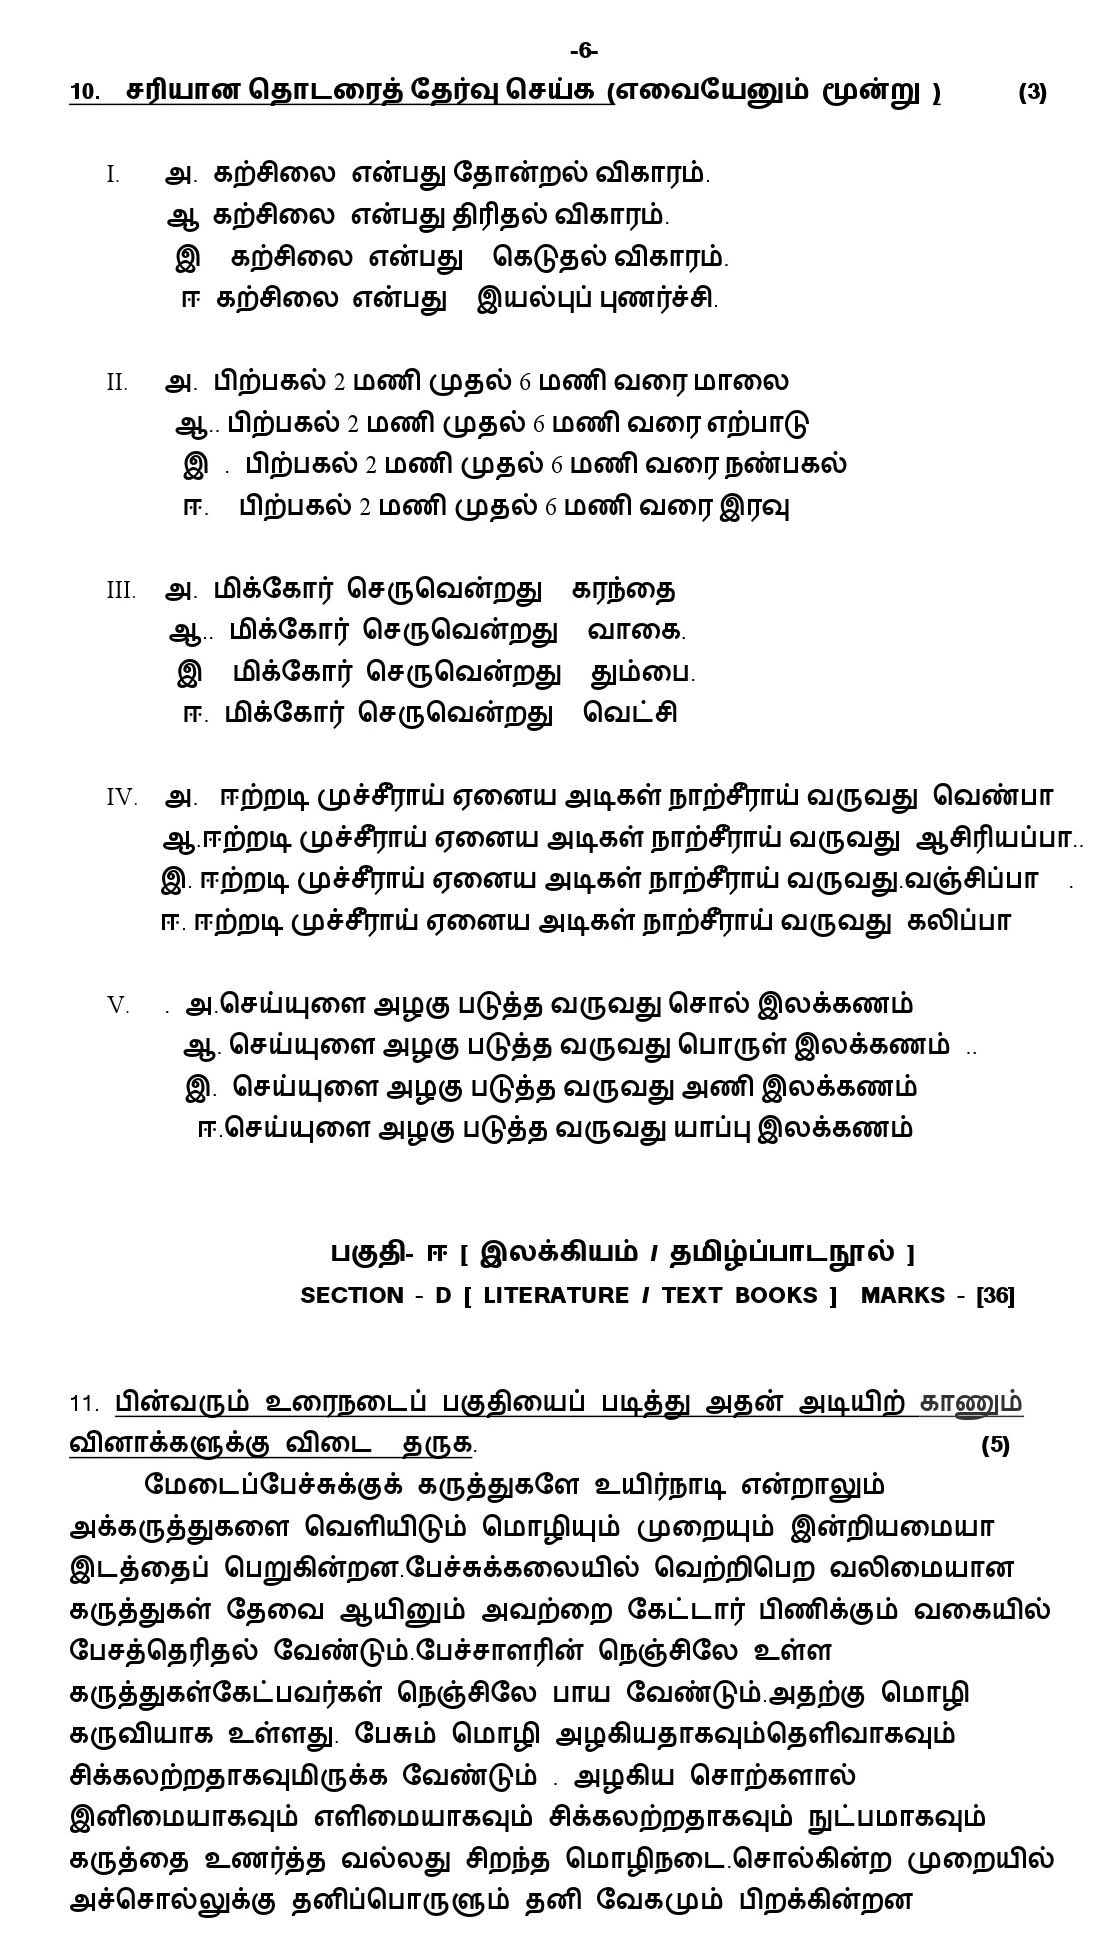 Tamil CBSE Class X Sample Question Paper 2018-19 - Image 6